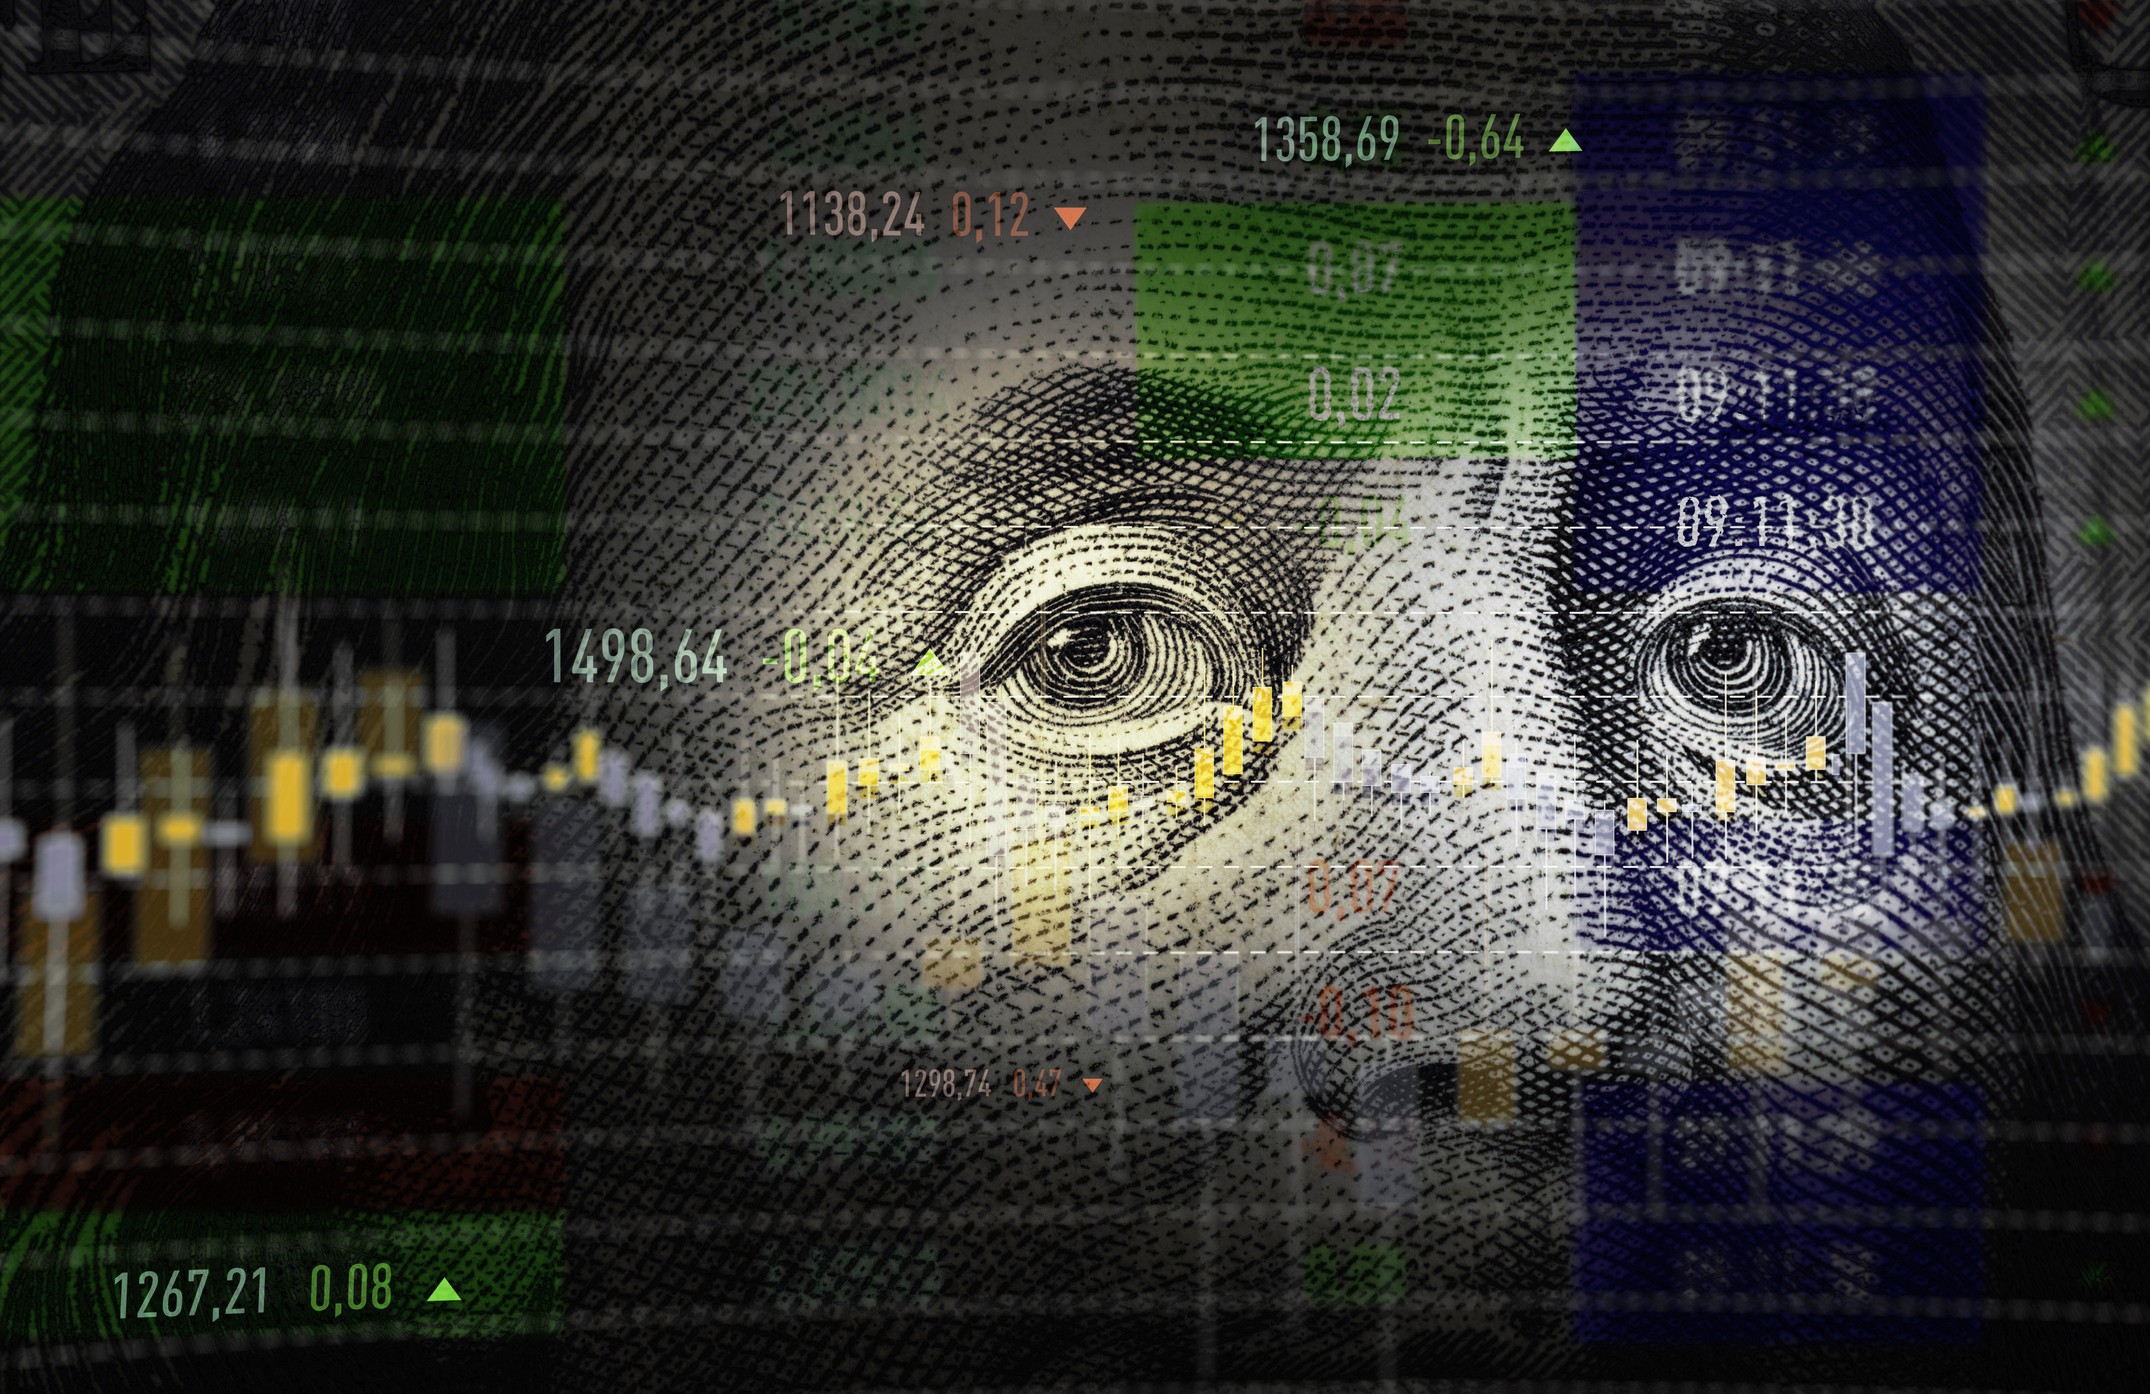 A photo illustration of a generic stock financial data analysis graph superimposed  over a close up  $100 US  dollar bill.